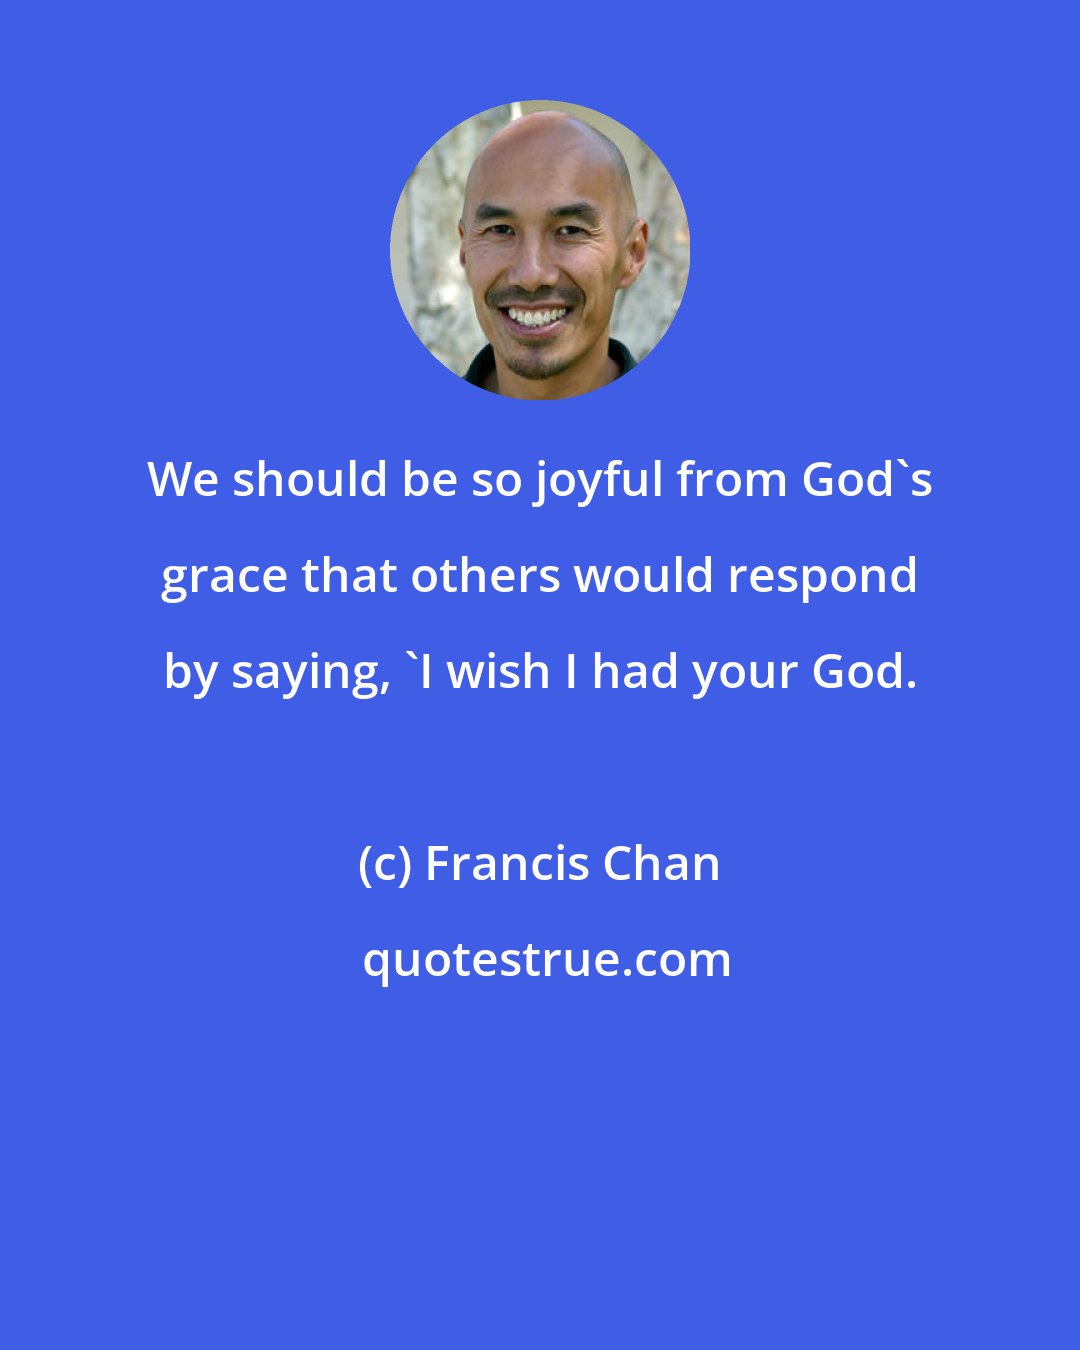 Francis Chan: We should be so joyful from God's grace that others would respond by saying, 'I wish I had your God.